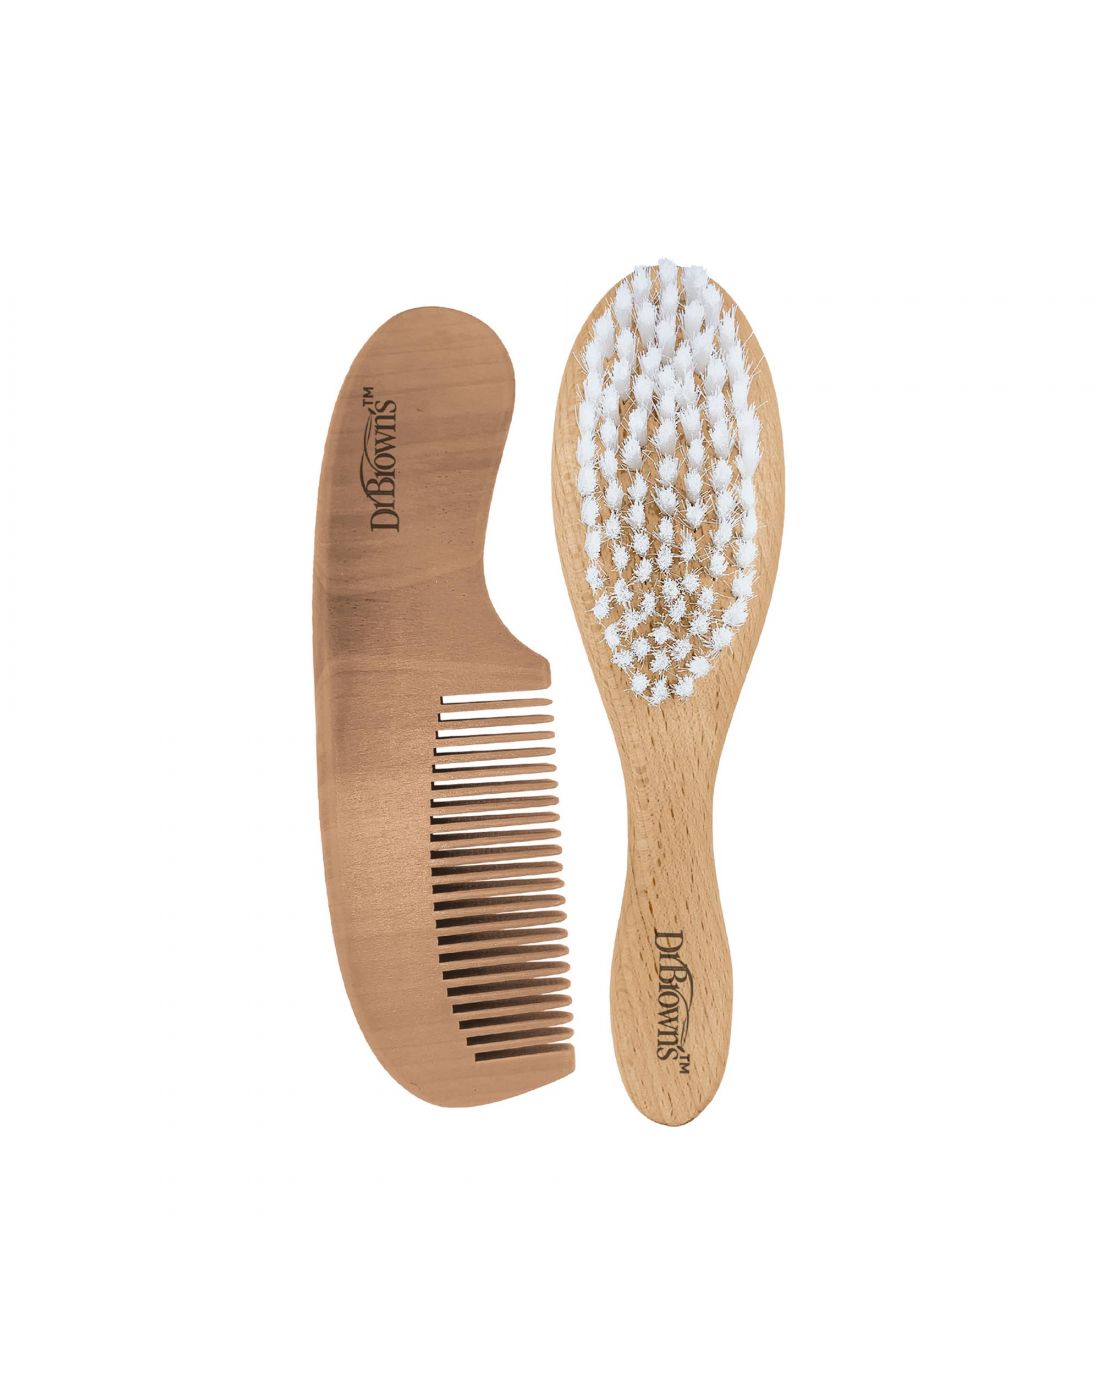 Dr.Brown's Wooden hair brush & comb set
